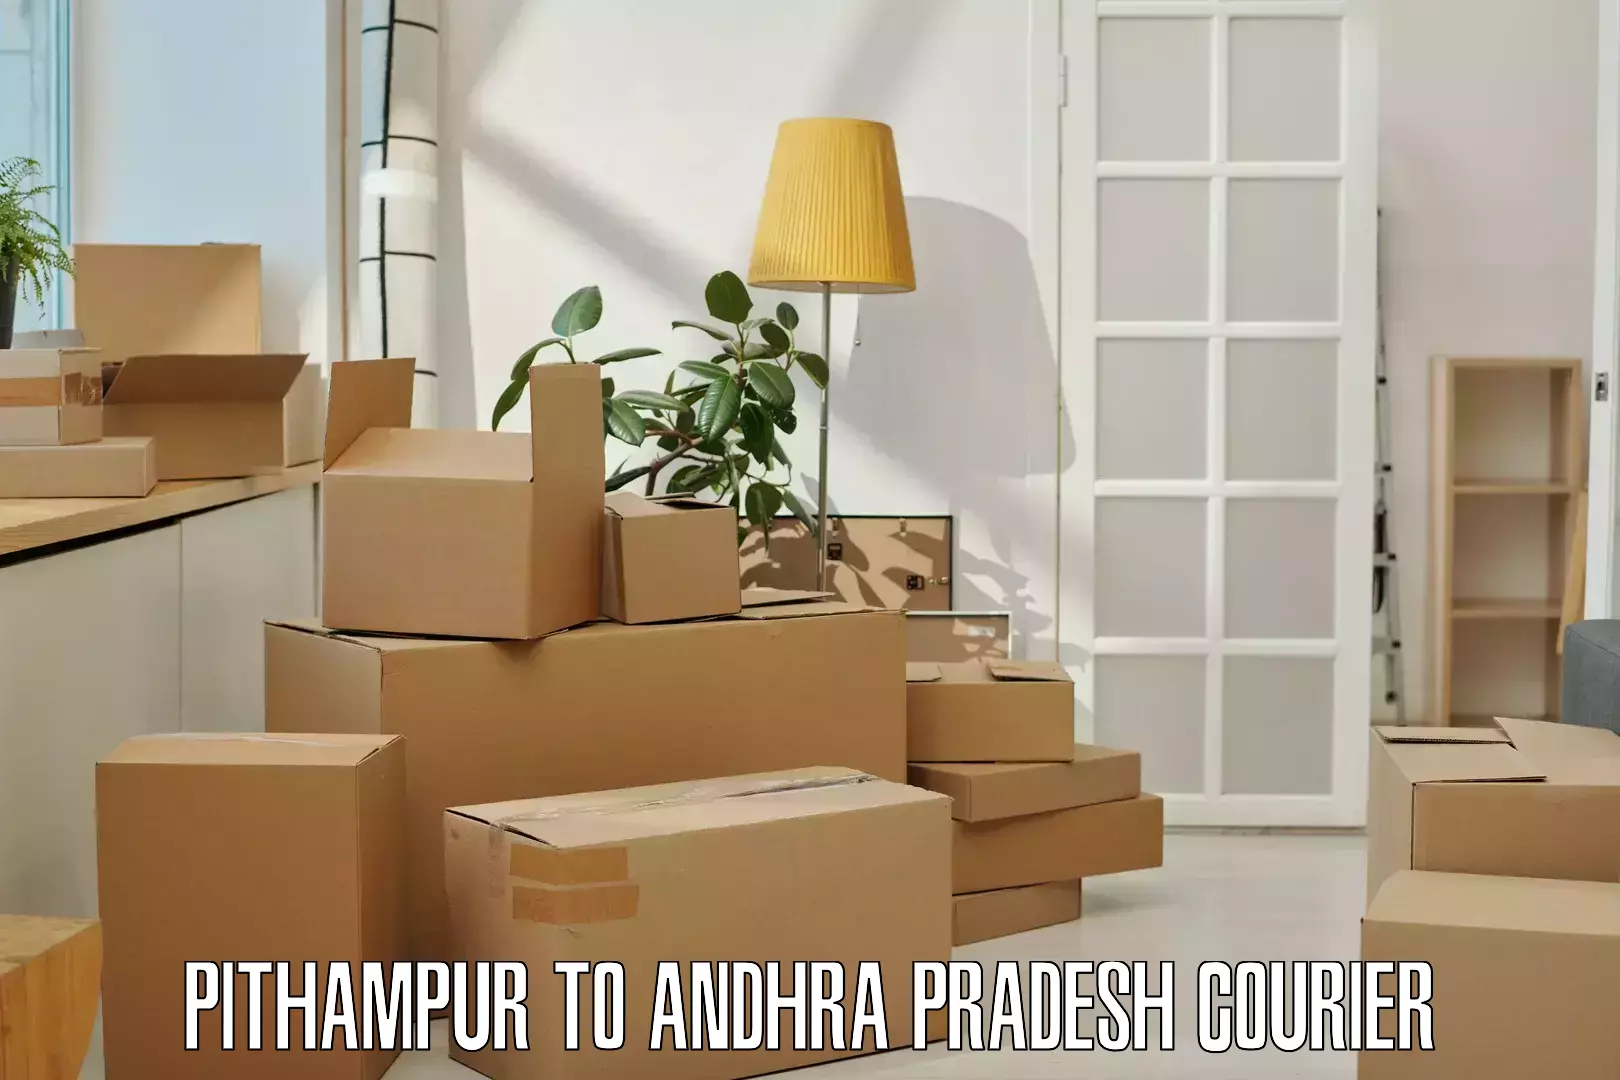 User-friendly delivery service Pithampur to Andhra Pradesh